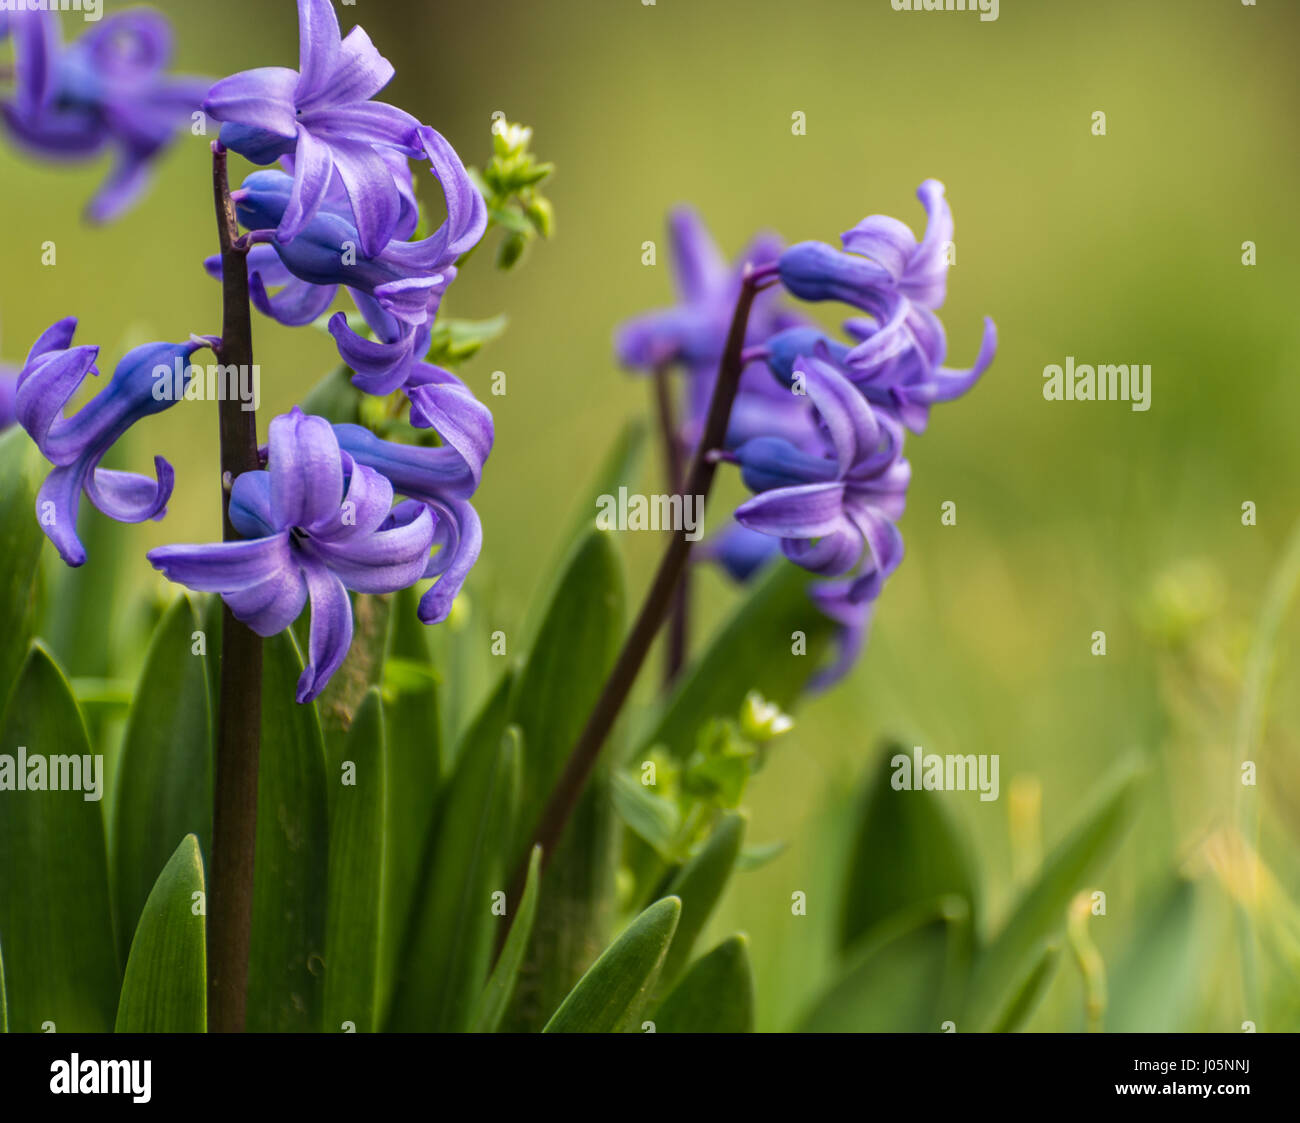 A blue common hyacinth (Hyacinthus orientalis) in flower Stock Photo